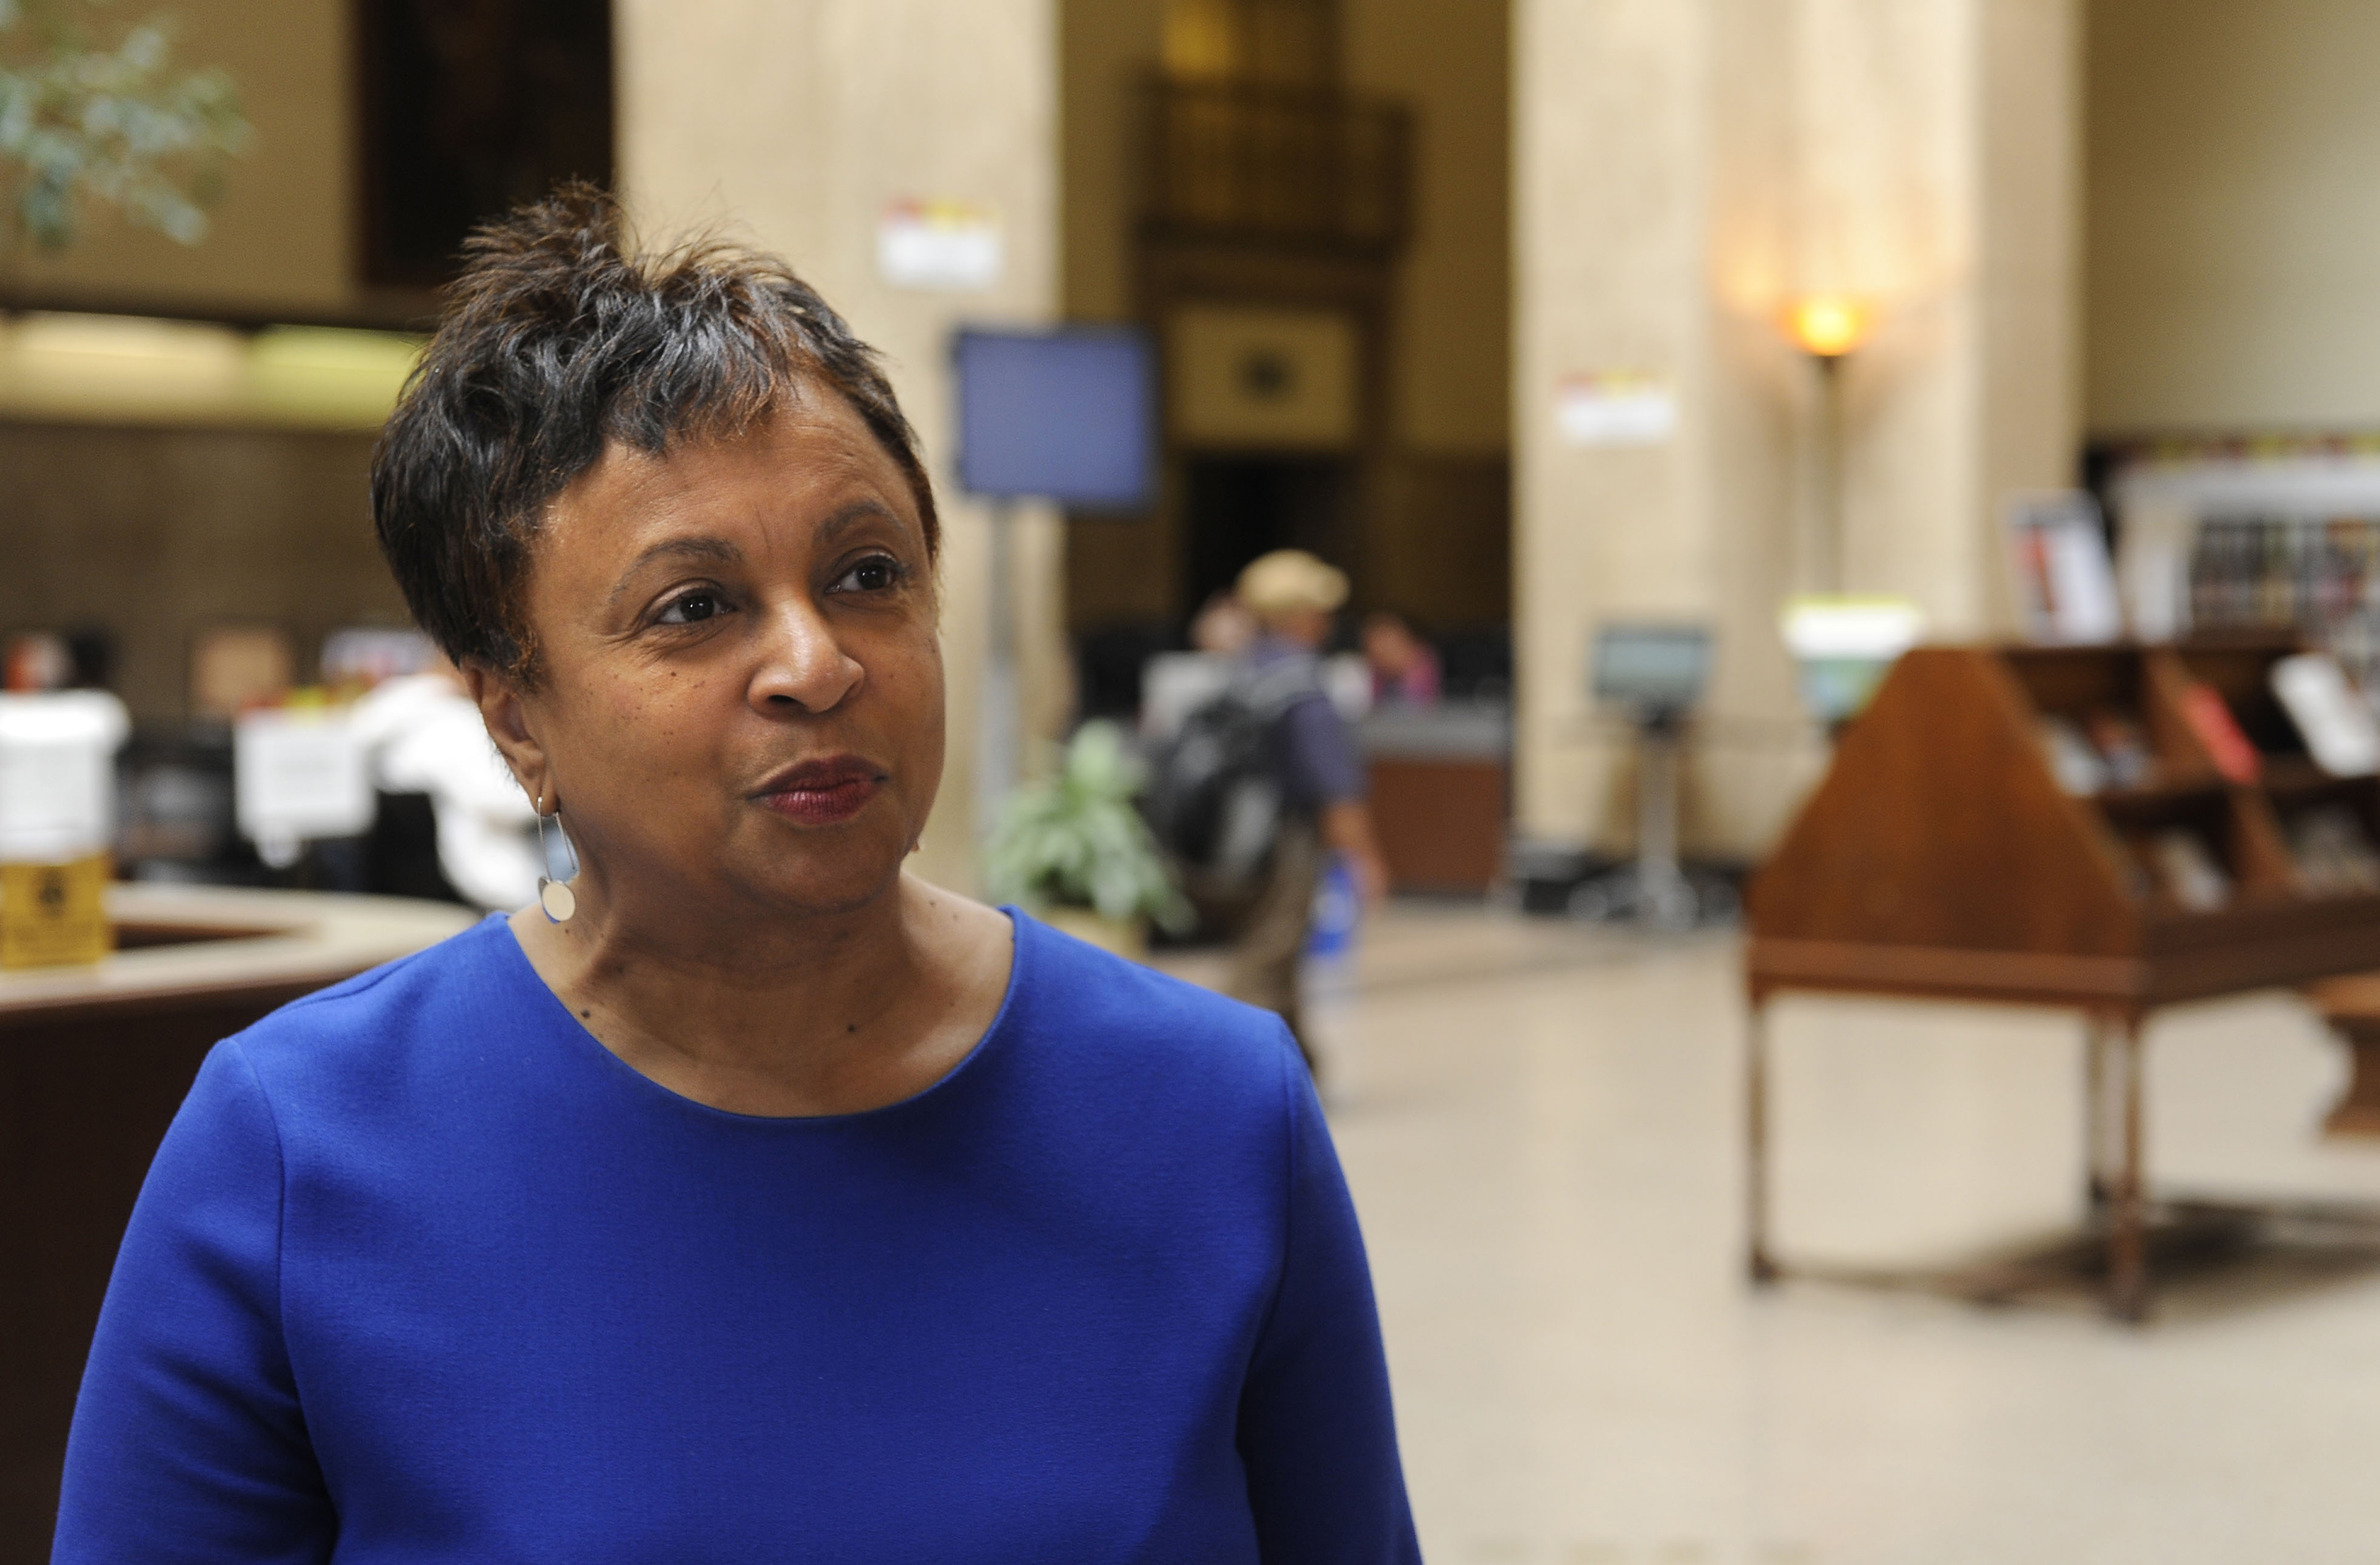 Carla Hayden, in an April 2015 file image, is confirmed by the Senate on Wednesday, July 13, 2016, to head the Library of Congress. (Baltimore Sun—TNS via Getty Images)